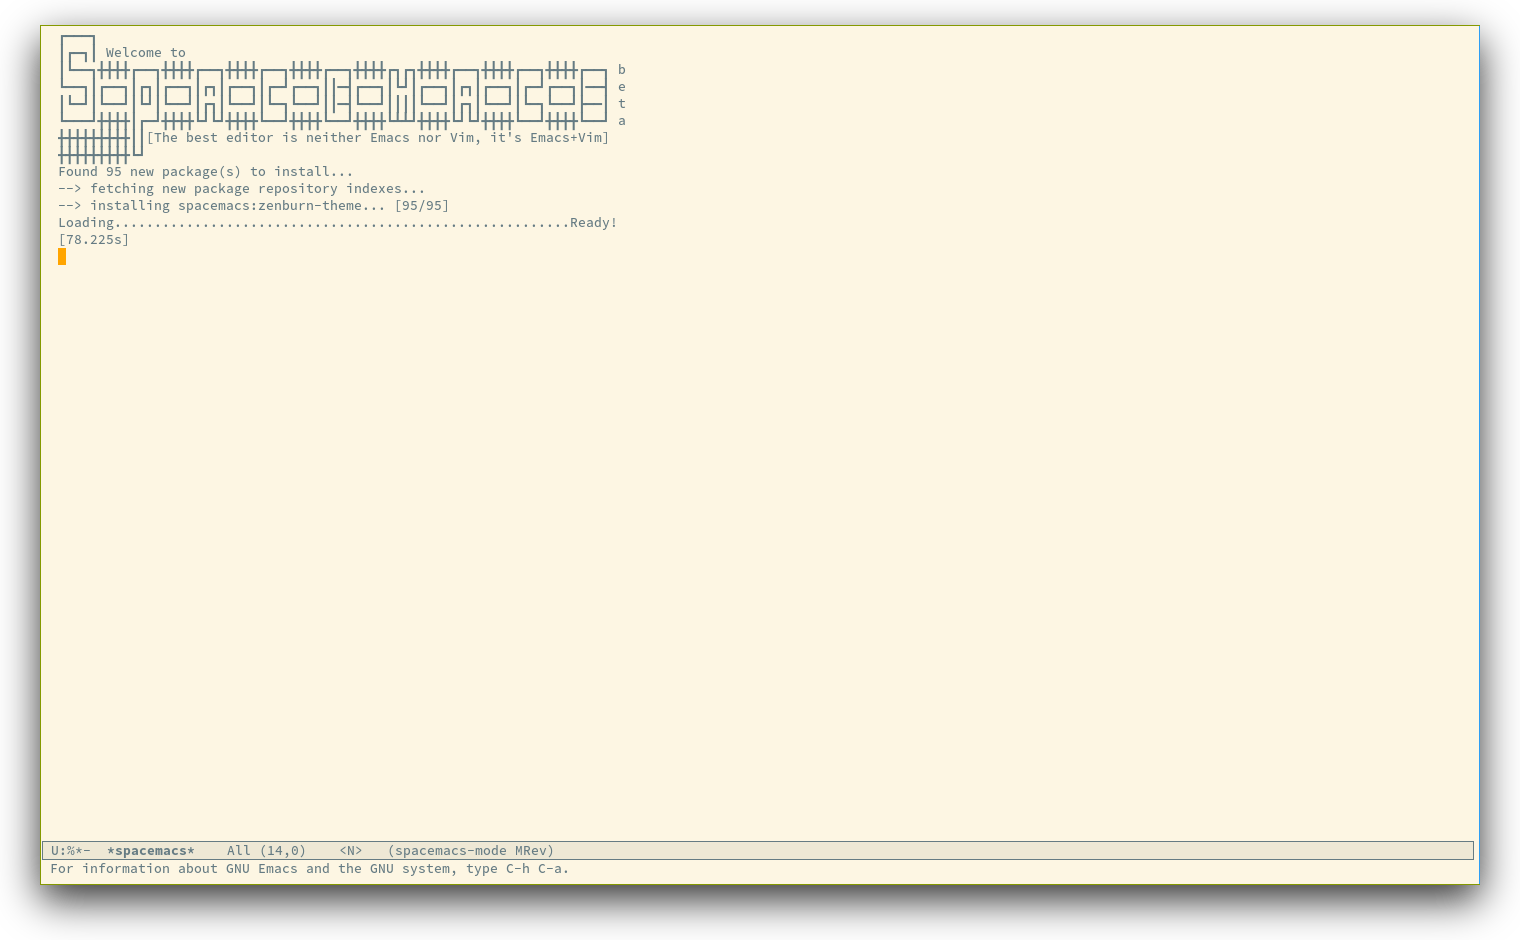 /TakeV/spacemacs/media/commit/b2628fb6b787fcbe578a8f8ce1d89644857d722a/doc/img/spacemacs-startup.png